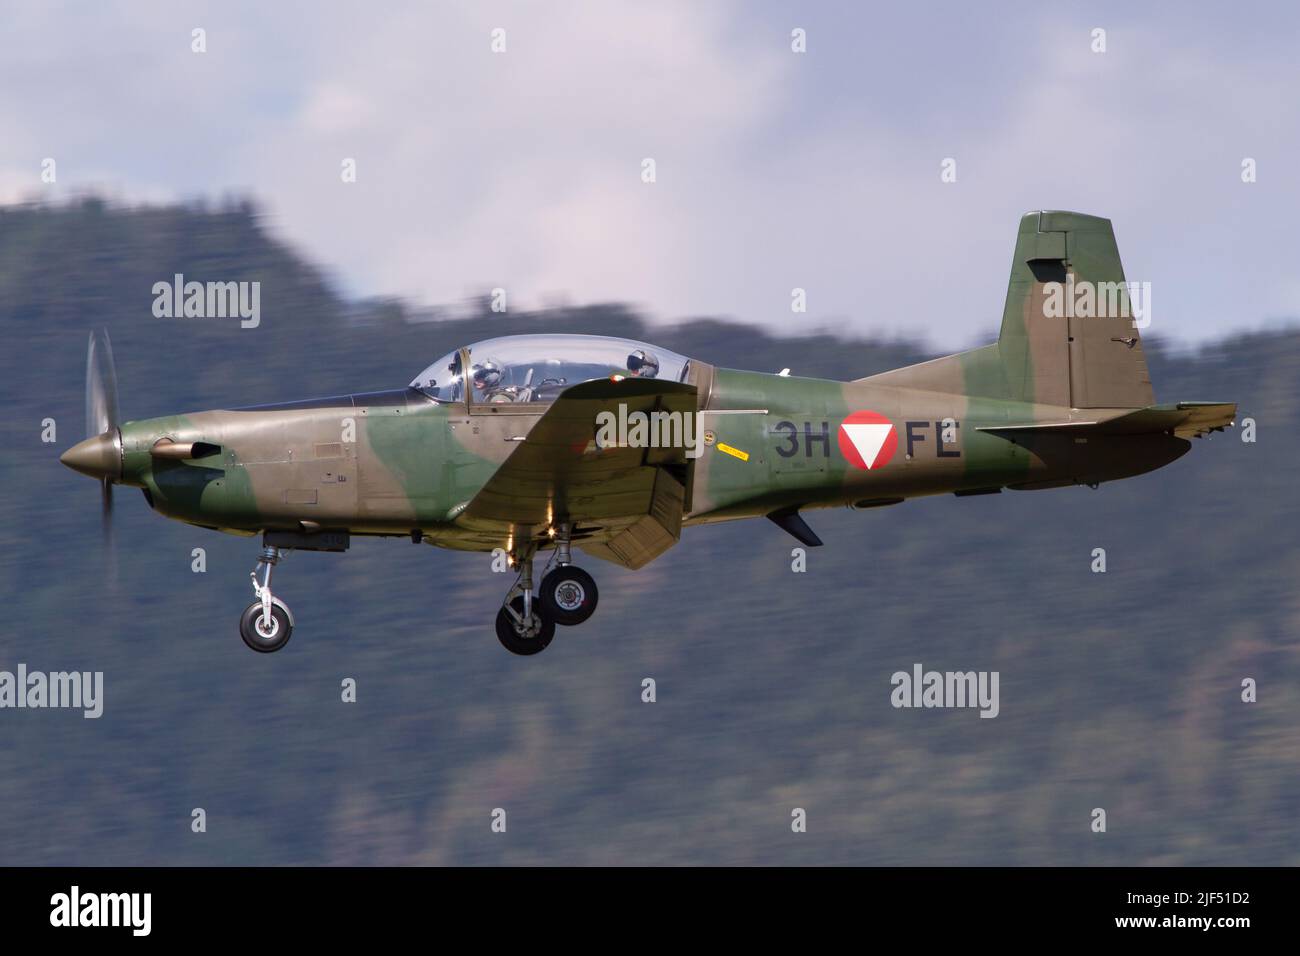 A Pilatus PC-7 training aircraft of the Austrian Air Force coming in for landing in Zeltweg in Austria Stock Photo